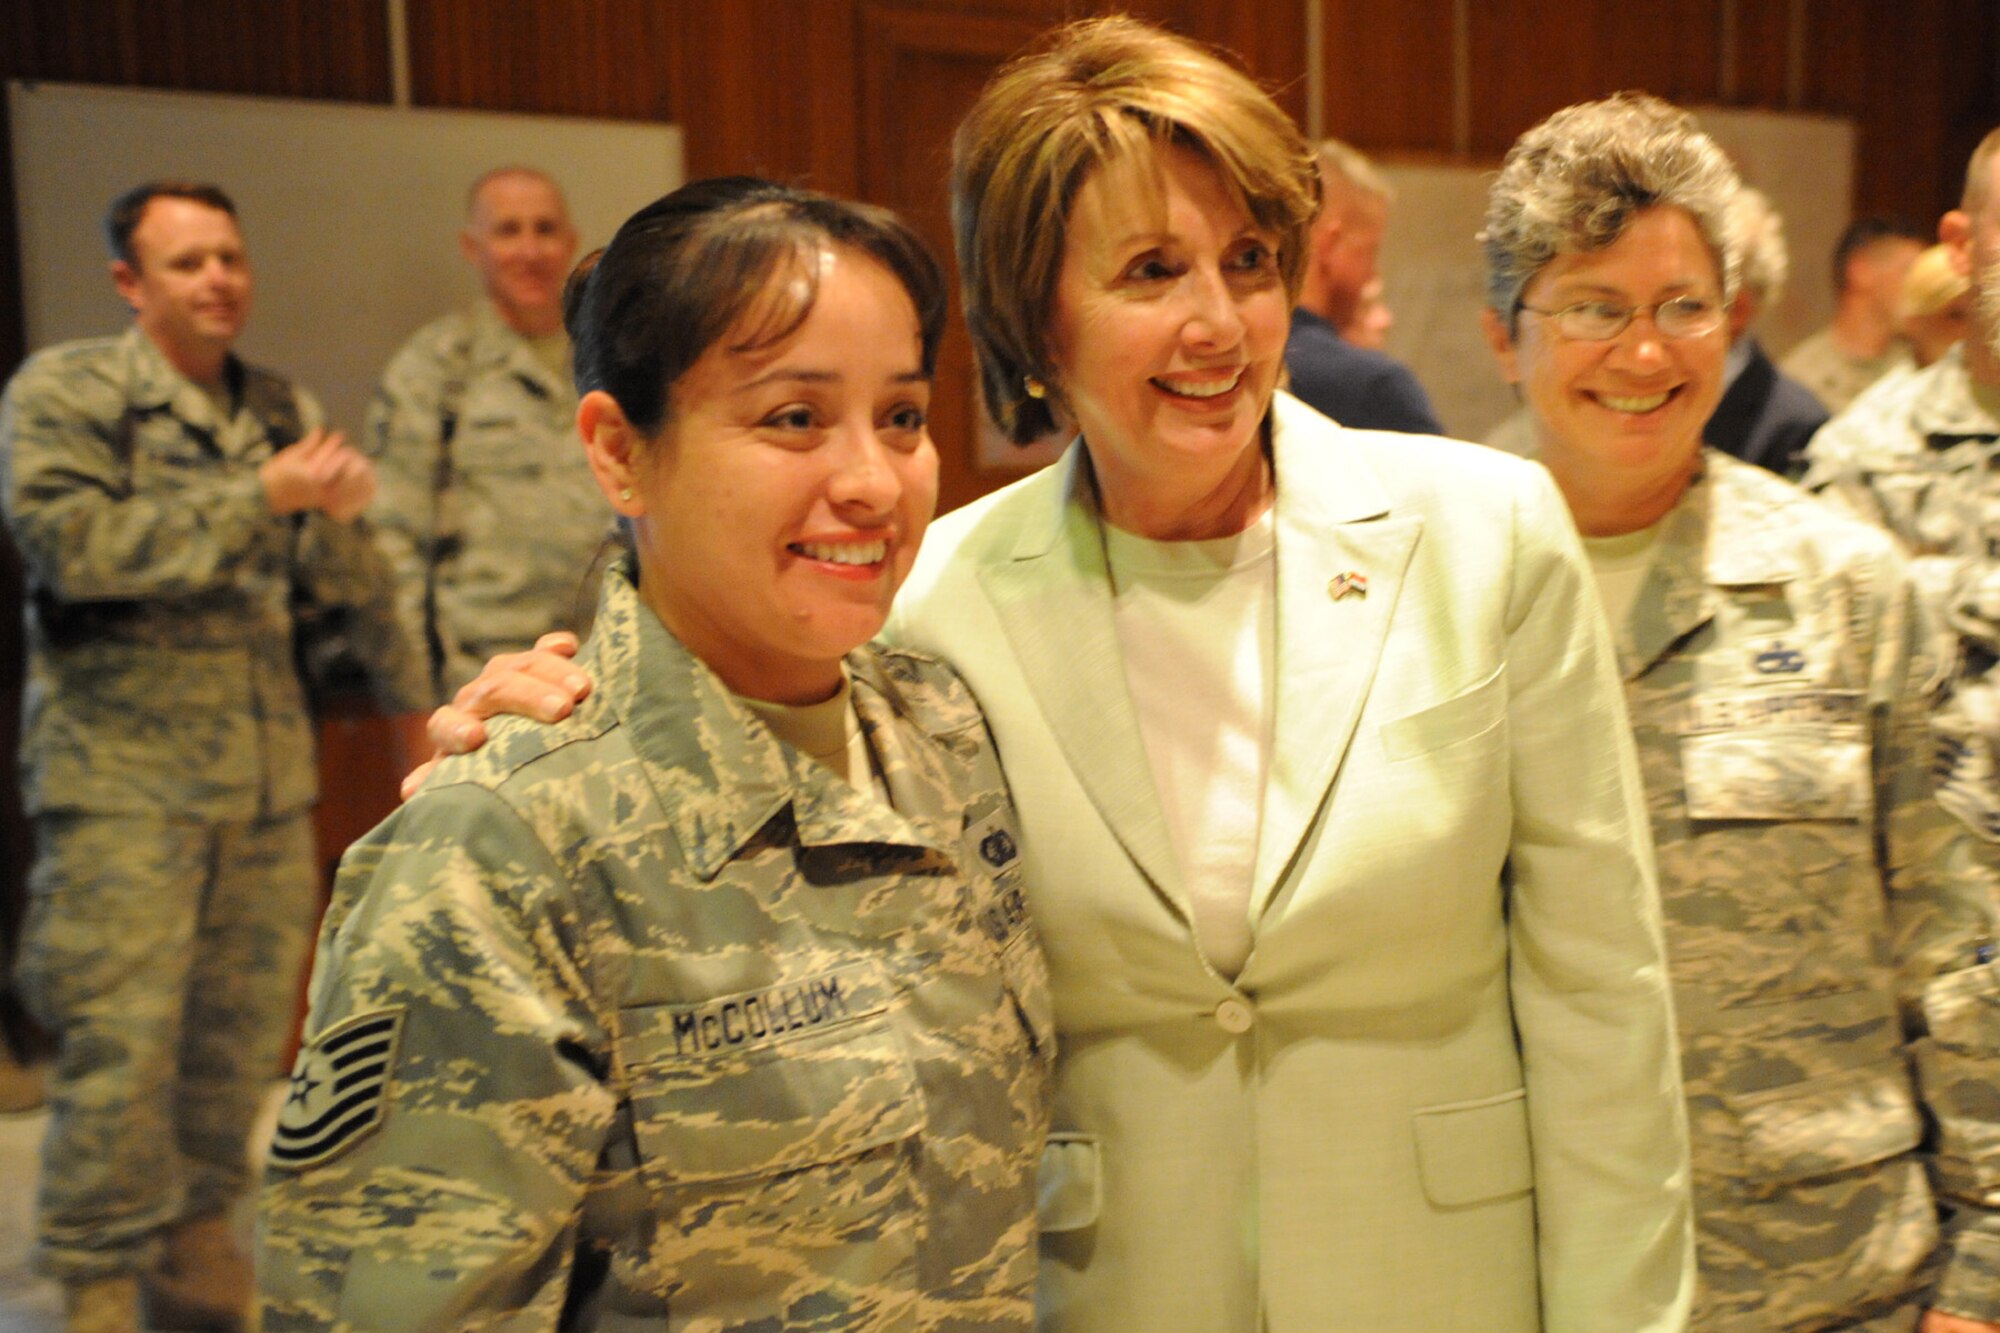 SATHER AIR BASE, Iraq -- Tech. Sgt. Dilphia McCollum, 447th Air Expeditionary Group, stands with the Speaker of the House, Nancy Pelosi, during the speaker's visit with deployed Airmen and Soldiers here May 17. Ms. Pelosi visited the base with seven other U.S. Representatives. (U.S. Air Force photo/Tech. Sgt. Amanda Callahan) 